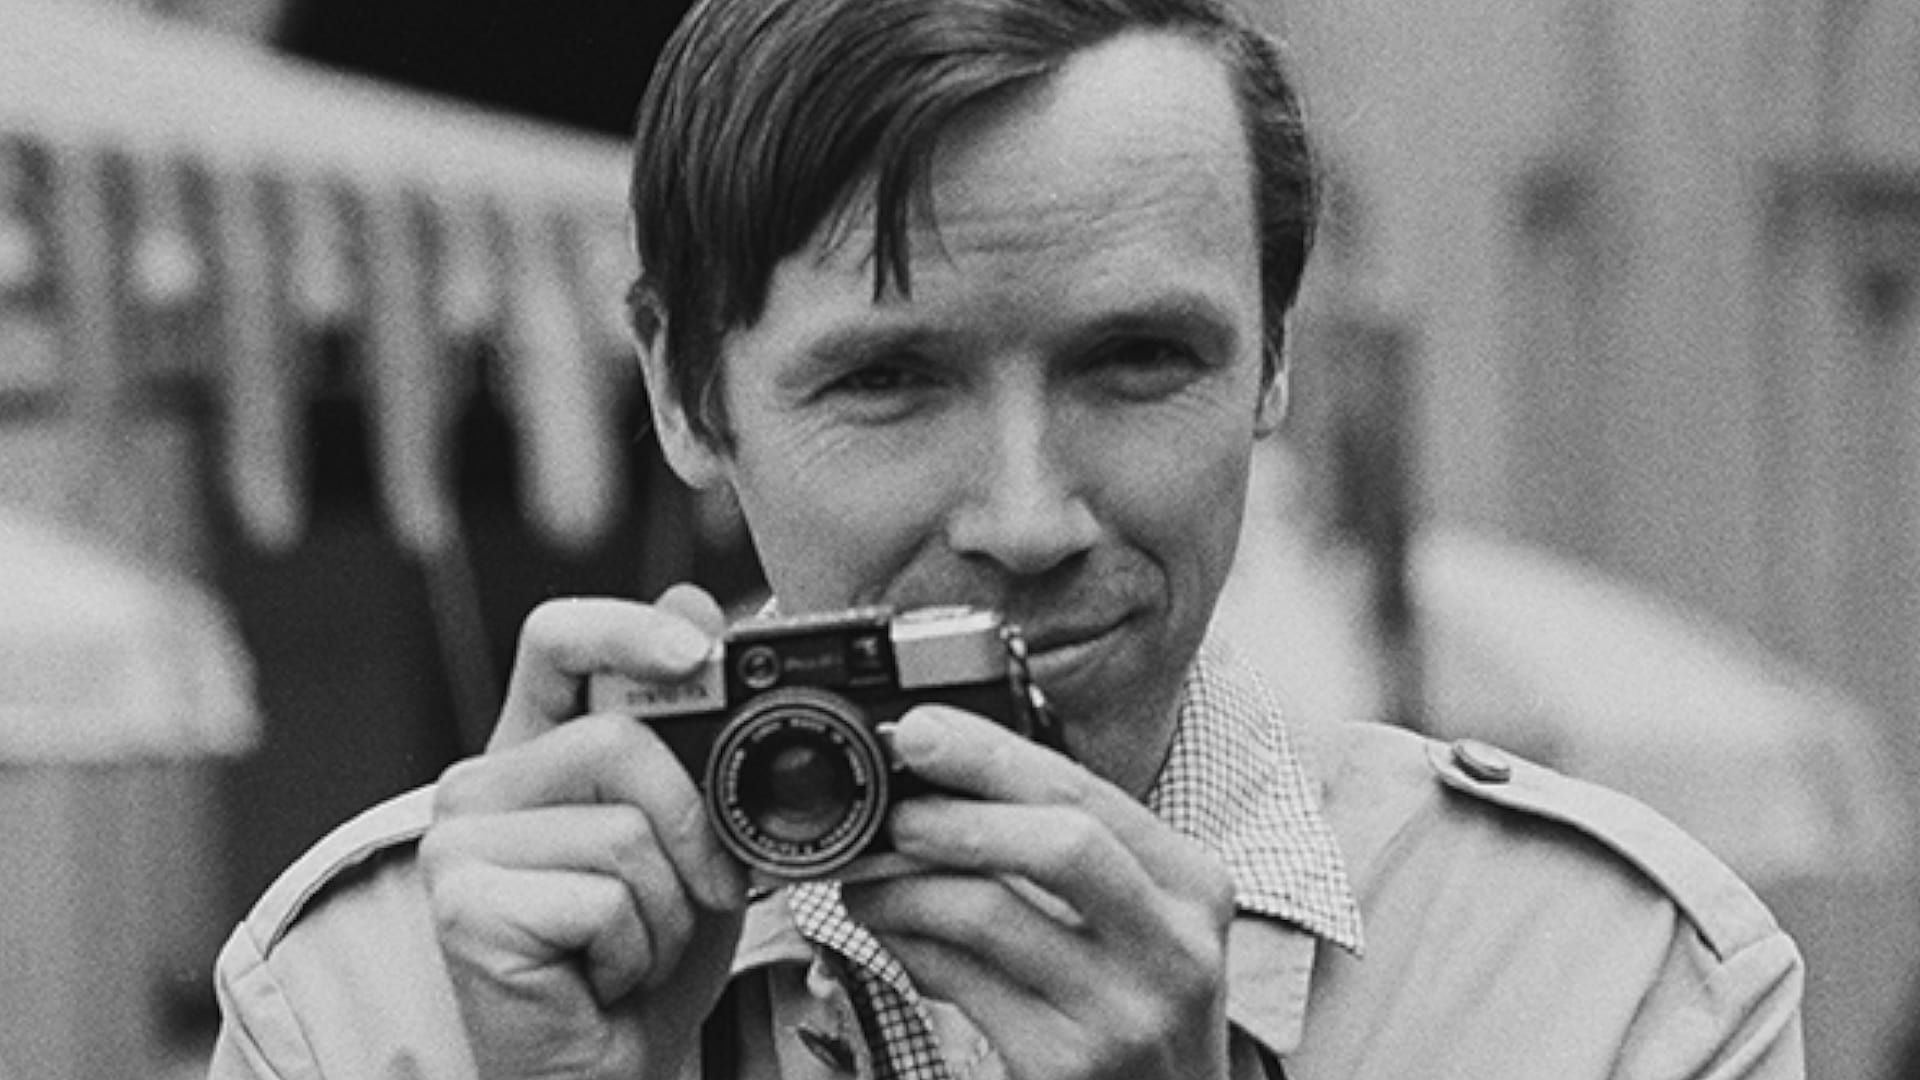 The Times of Bill Cunningham background